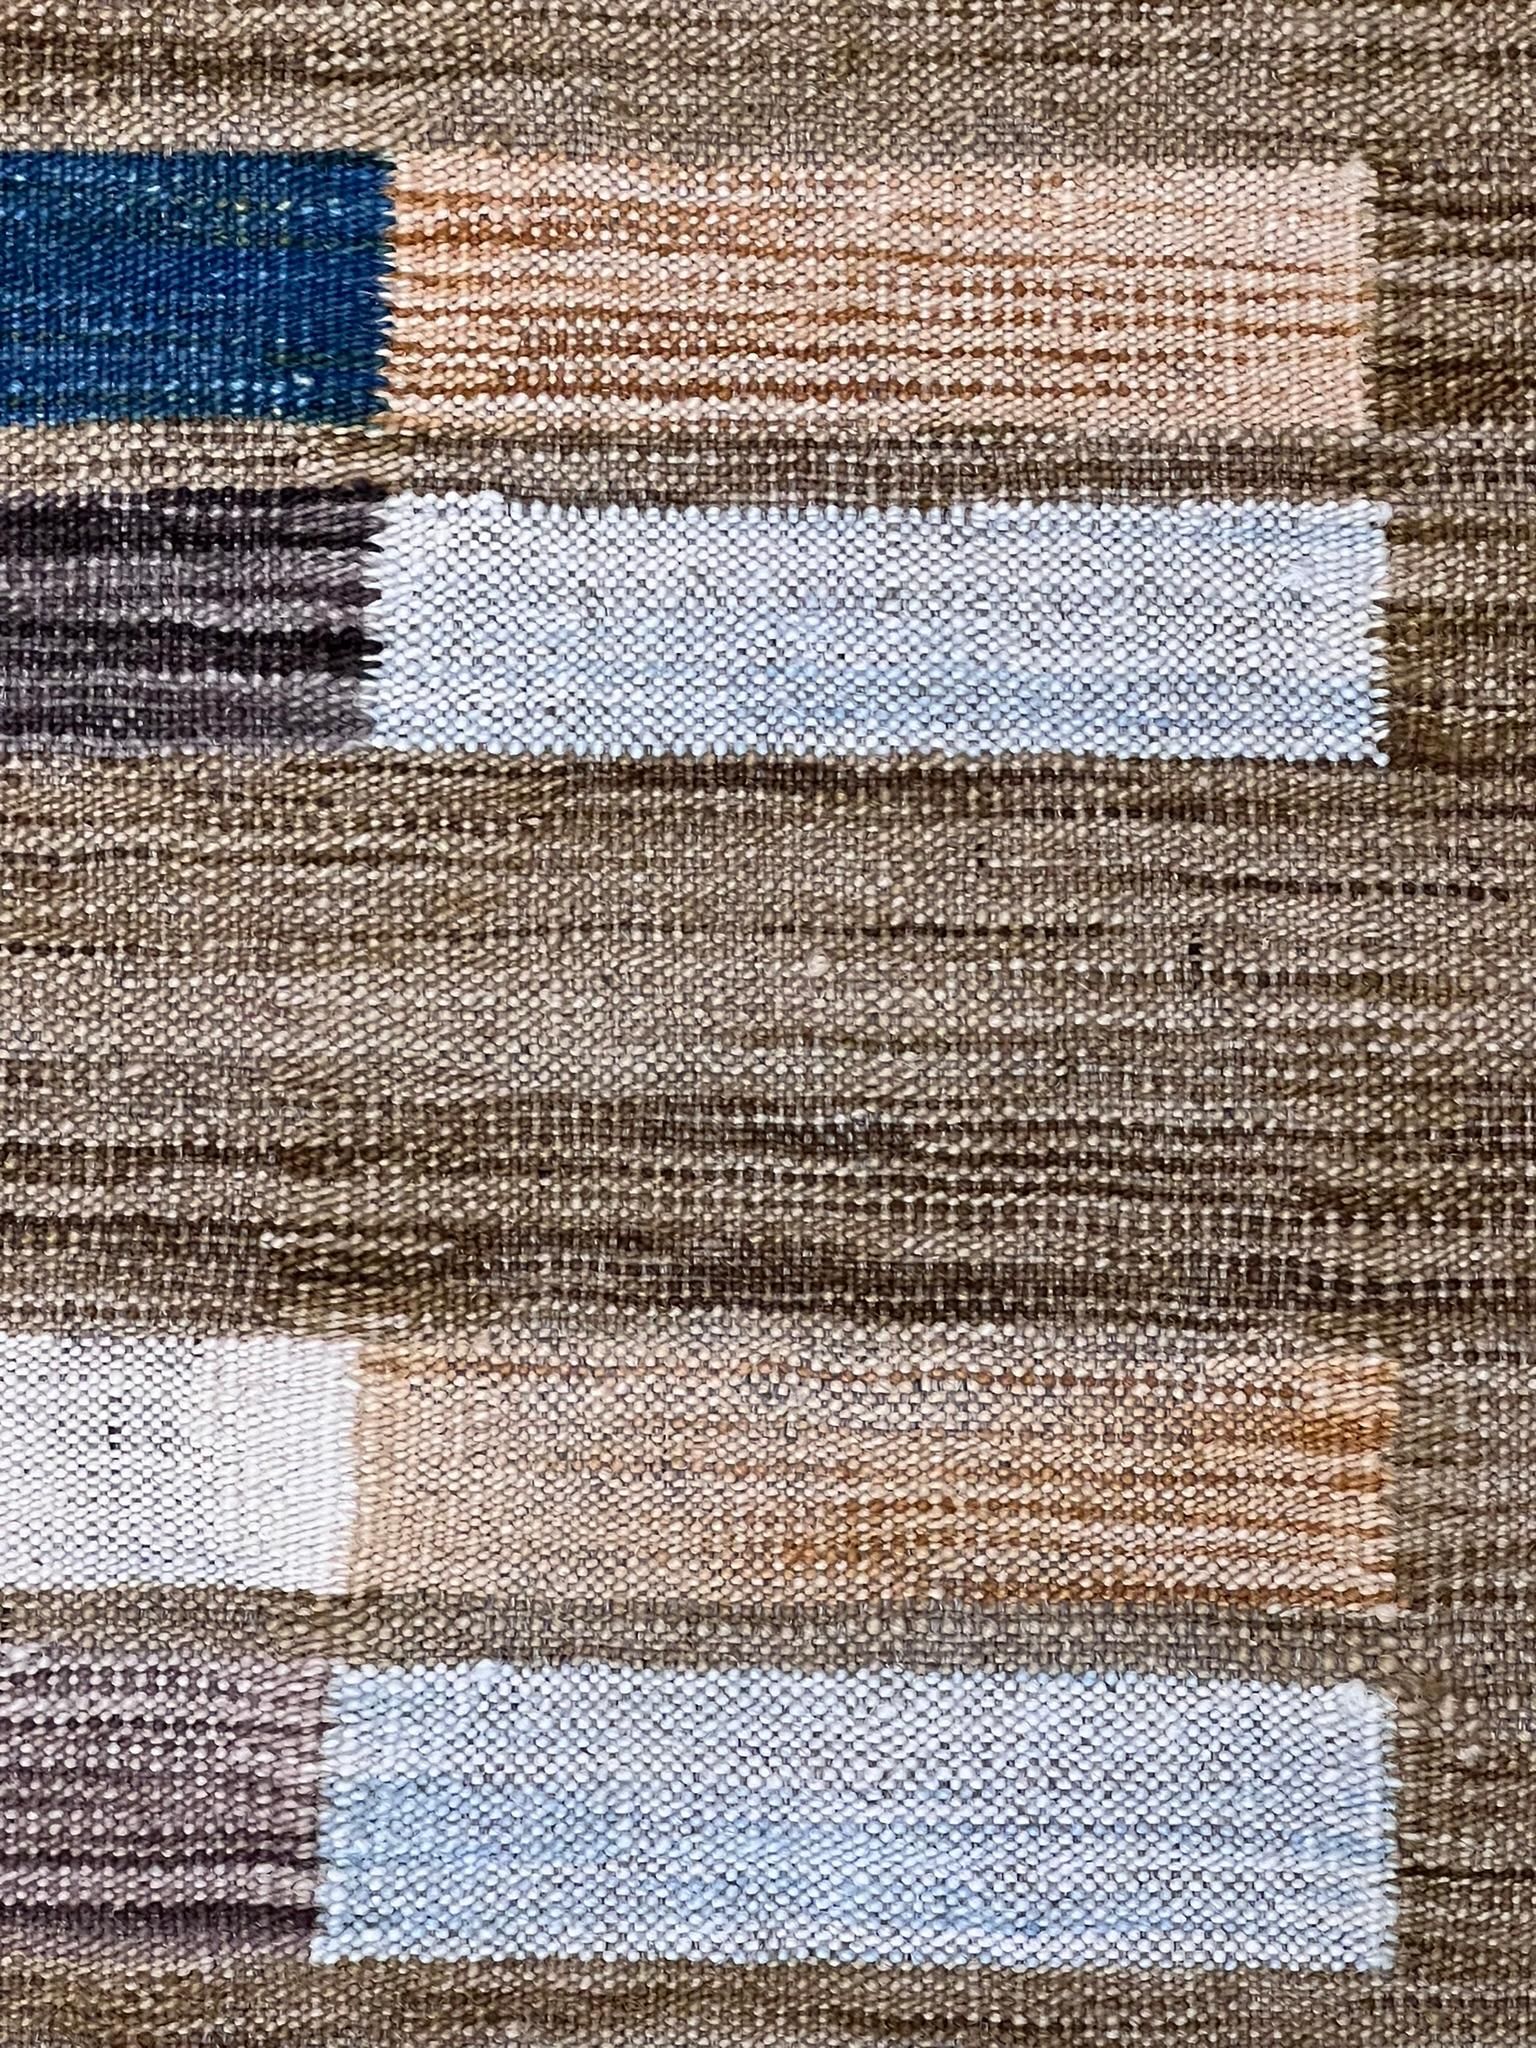 The design with a distinctly modern layout and the absolutely different colors from the traditional ones are the main features of this Afghan-made kilim. The flat-weave technique enhances these characteristics, making this artifact a suitable piece